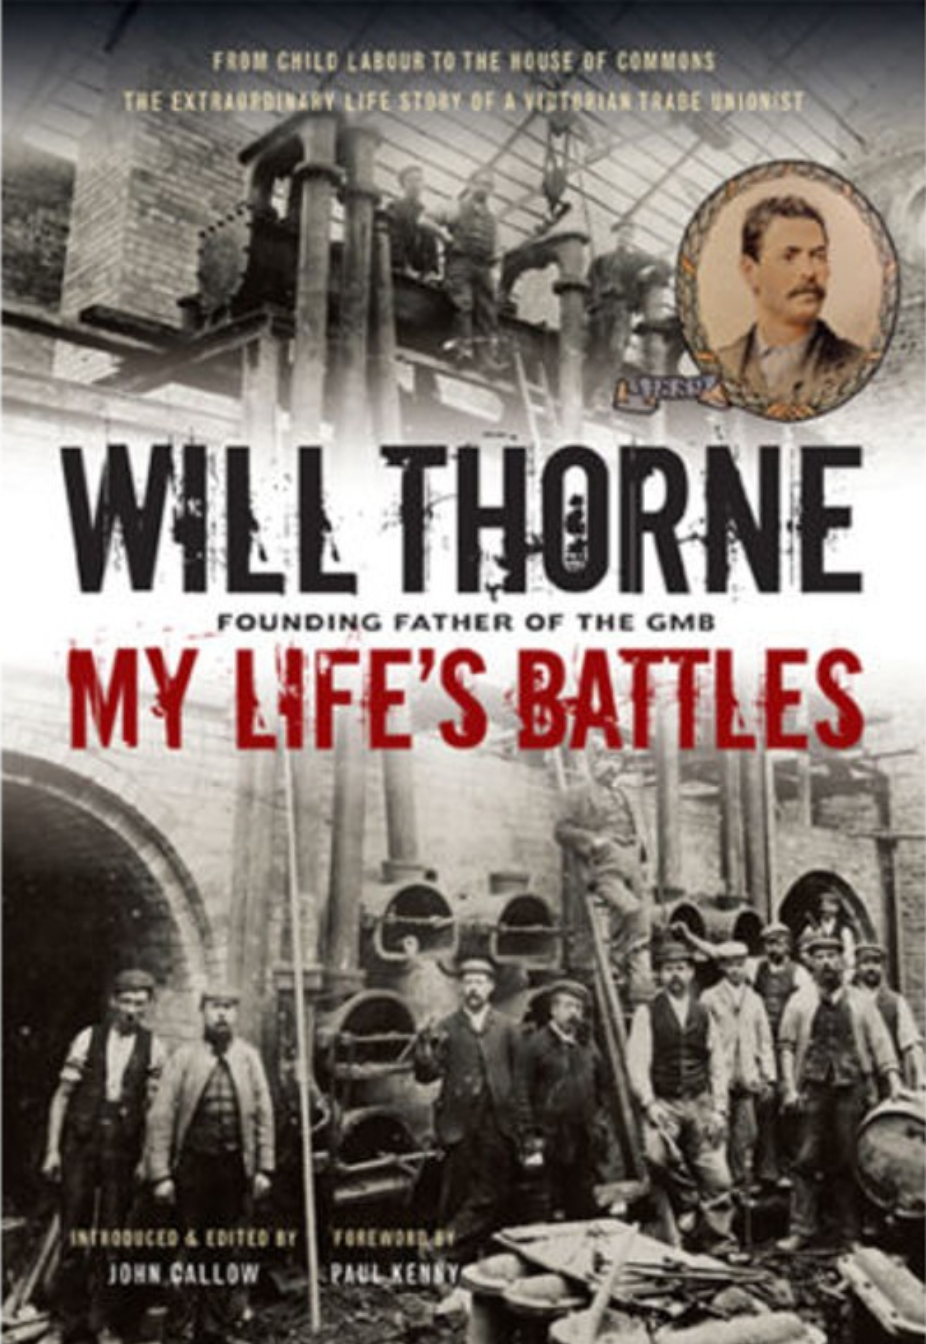 IISH Collections | Bookblog | Wil Thorne